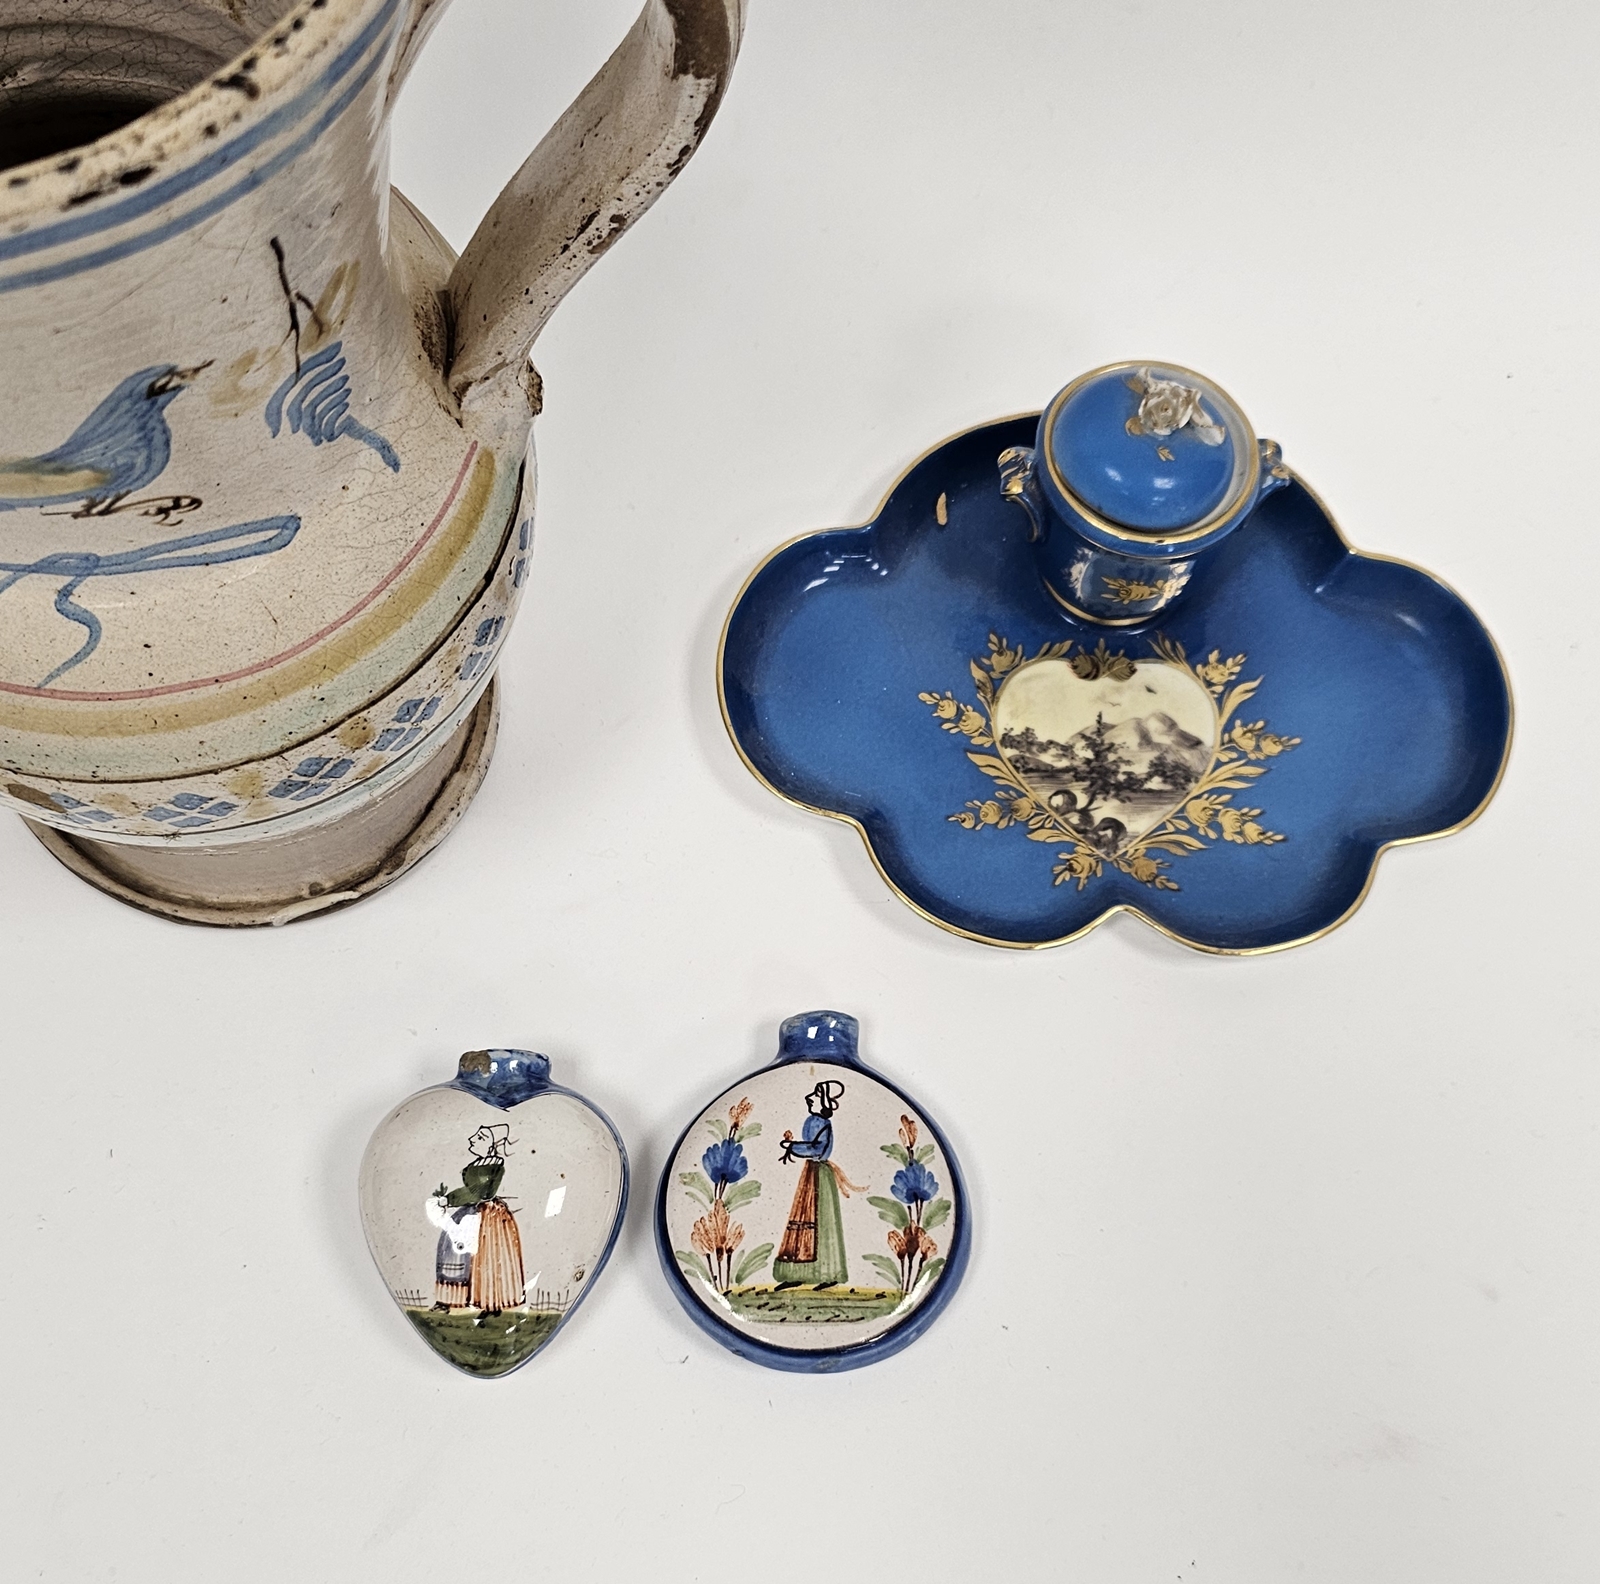 Collection of Continental pottery and porcelain, 19th century and later, including a Sevres-style - Image 2 of 3